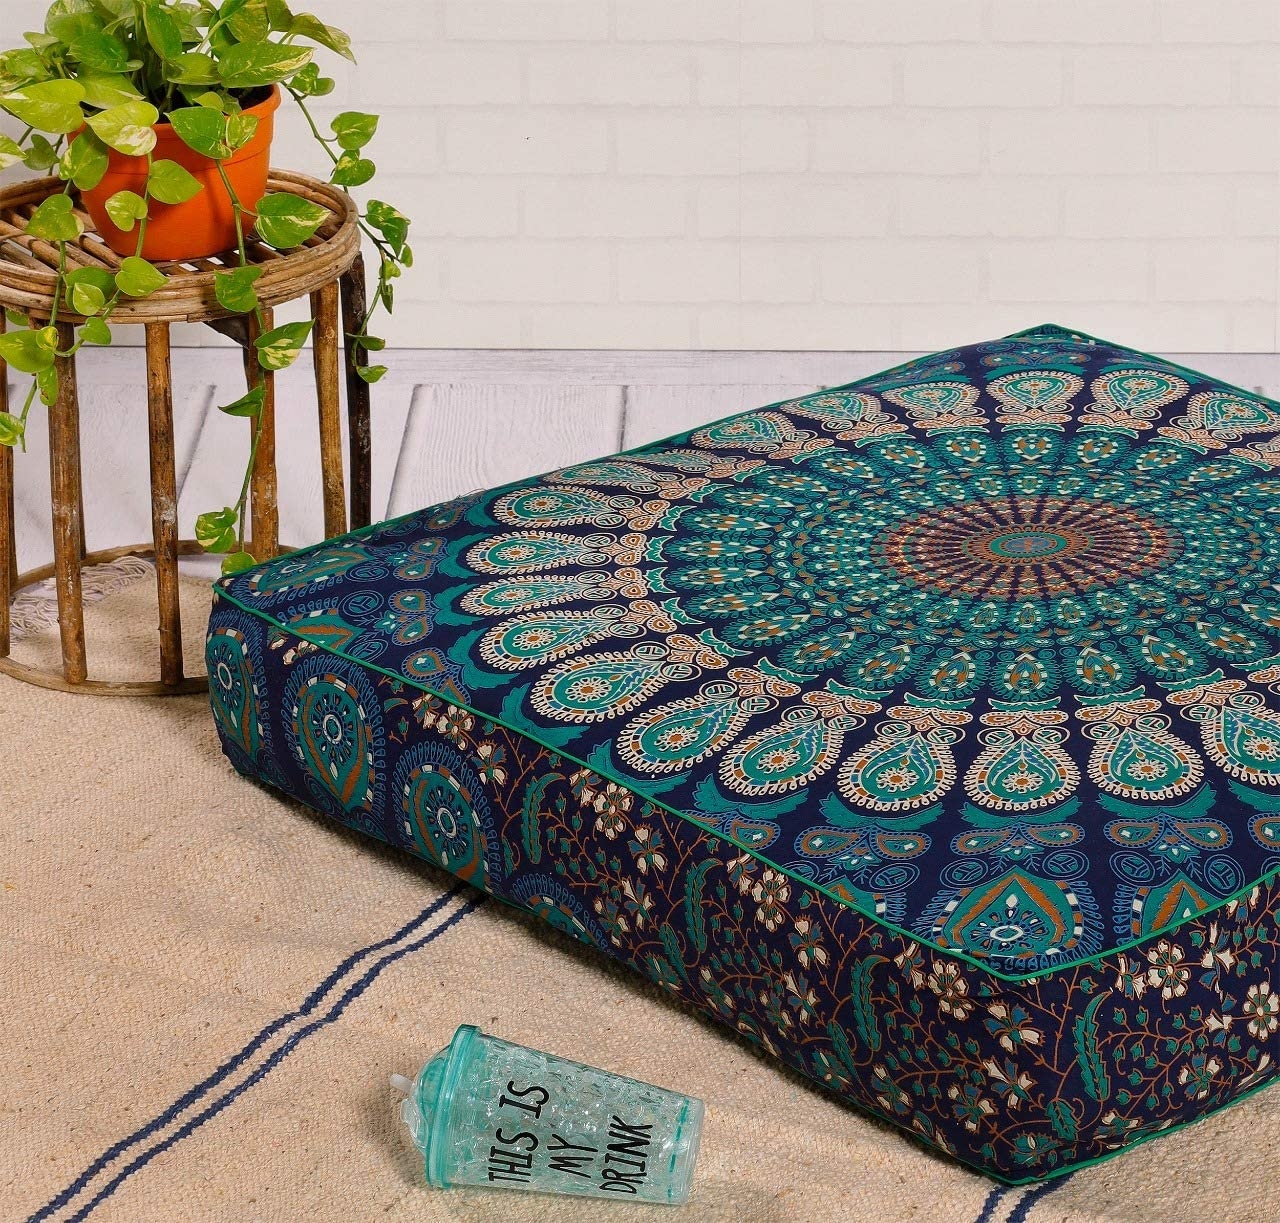 18 x 18 x 13 Inch Janki Creation Ombre Mandala Ottoman Indian Pouf Cover Round Floor Pillow Ottoman Living Room Large Seating Floor Pillow Cover 